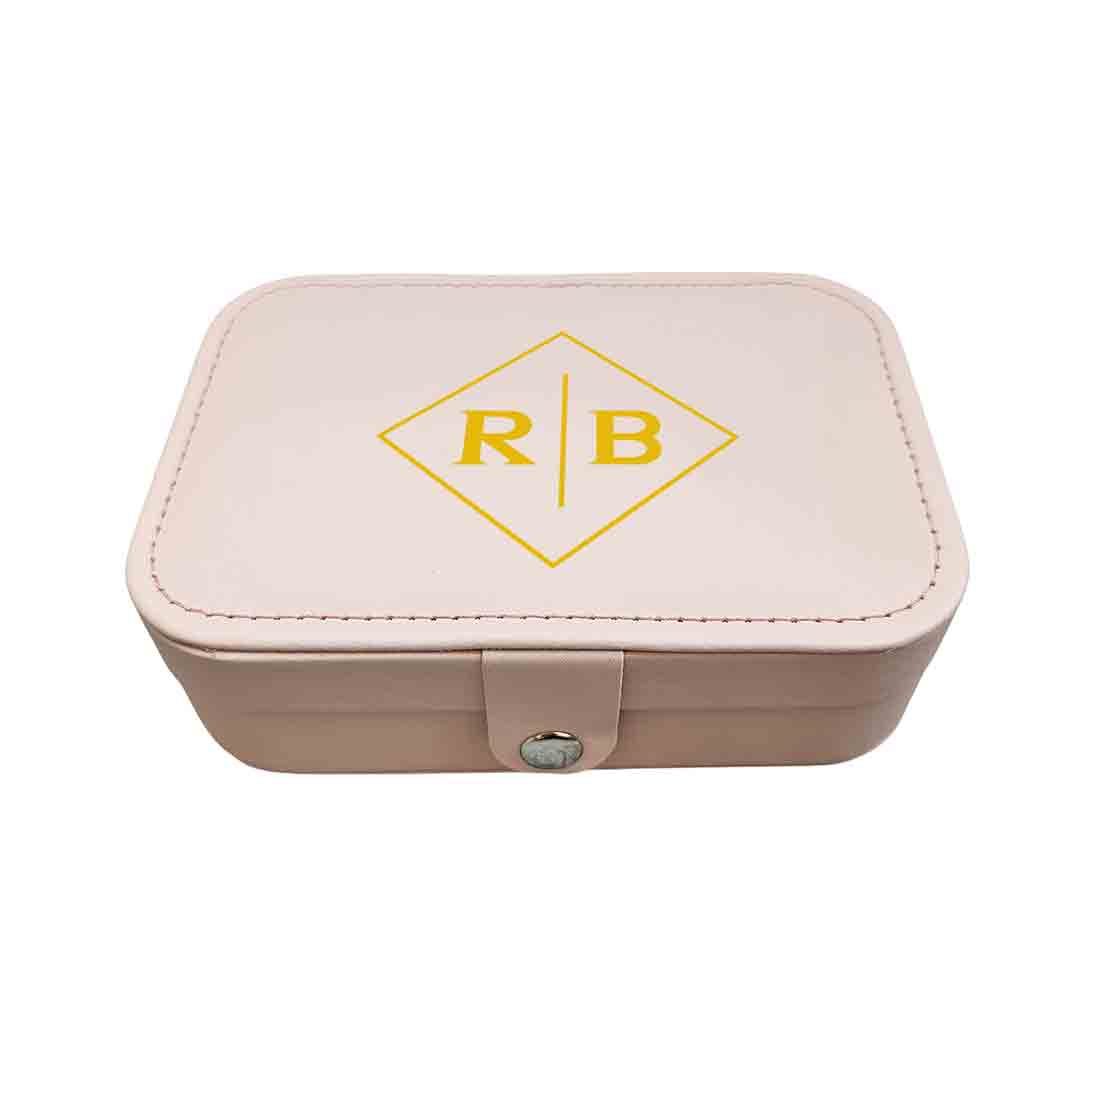 Personalized Jewellery Box Monogrammed Portable Travel Trinklet Organizer for Women